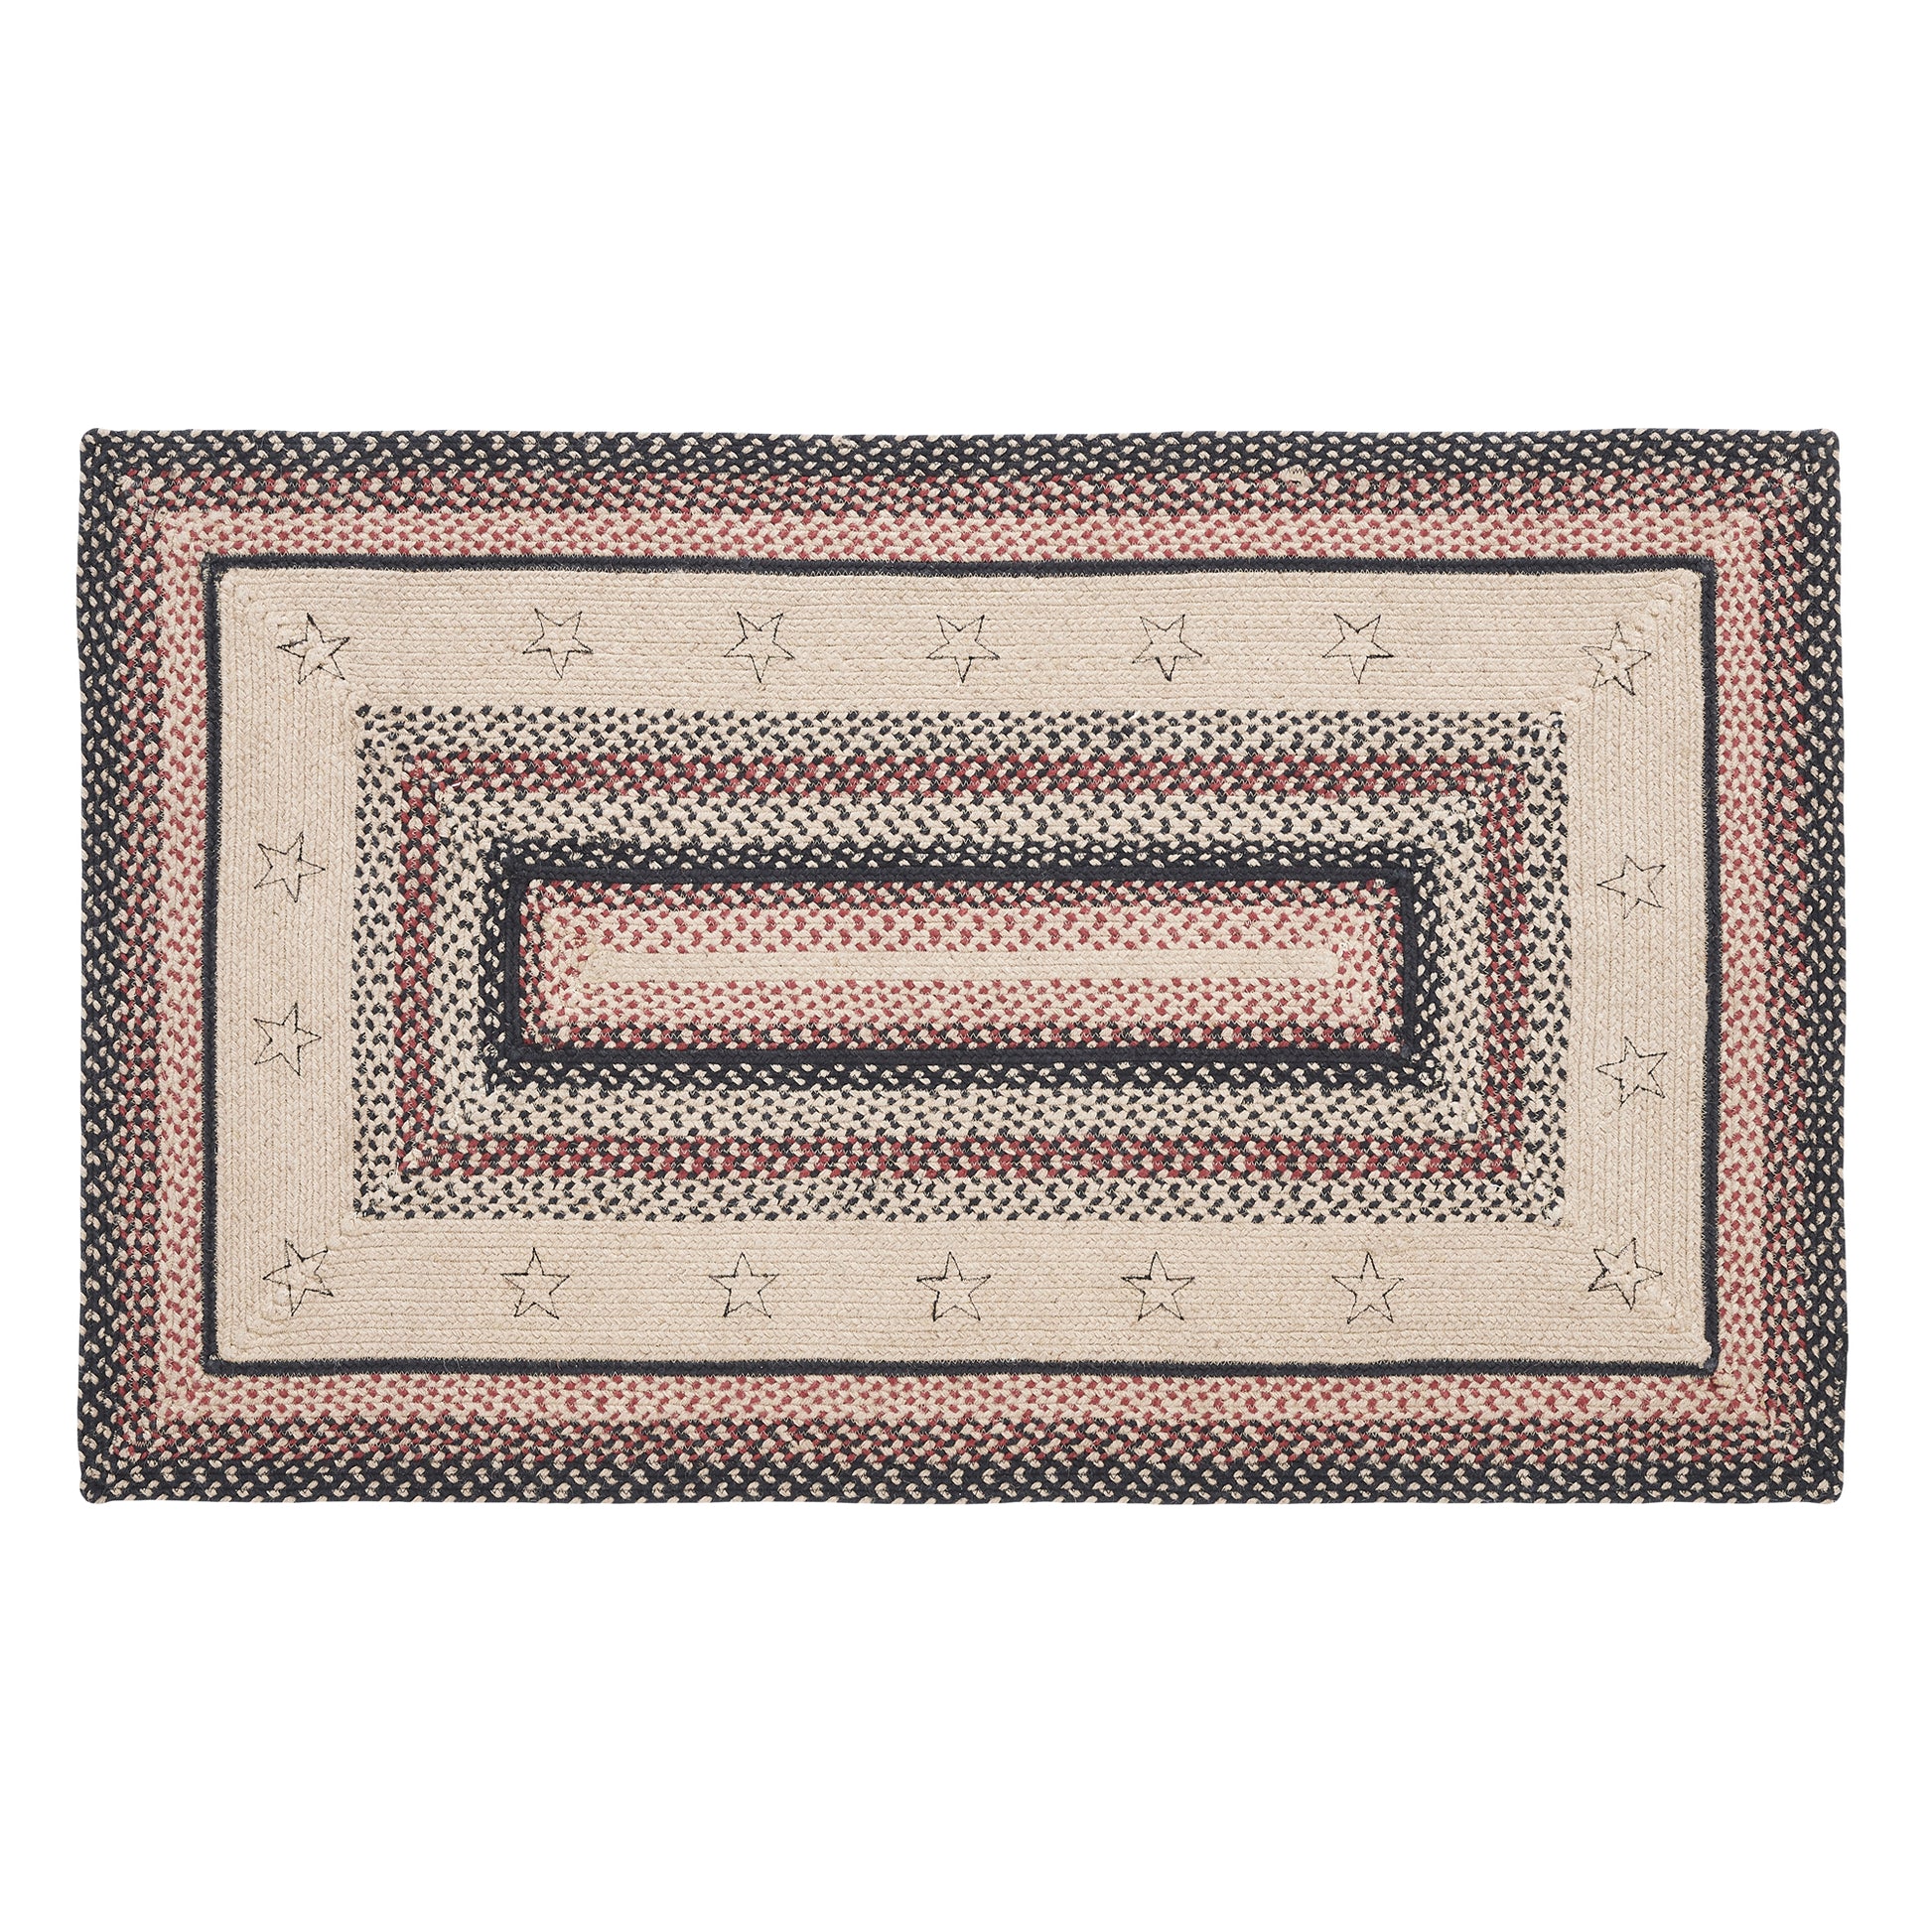 81335-Colonial-Star-Jute-Rug-Rect-w-Pad-36x60-image-8